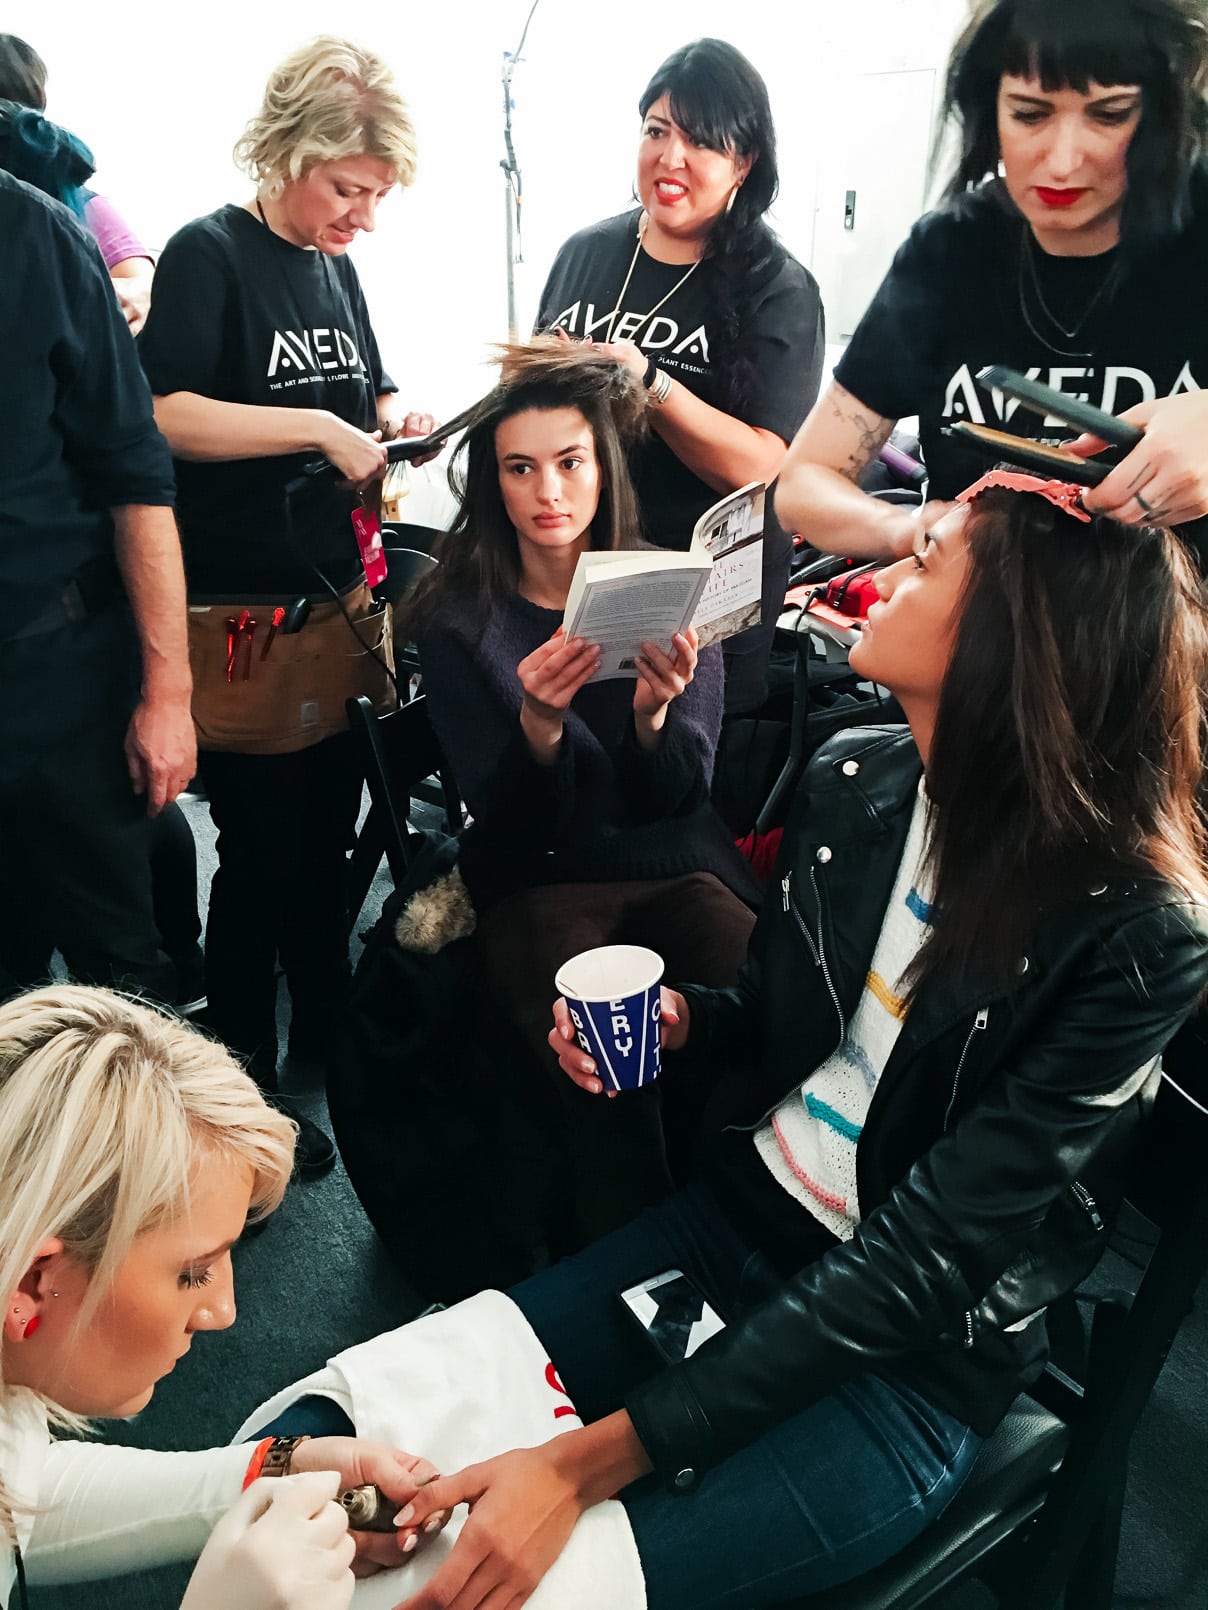 Pam Hetlinger, New York Fashion Week, backstage at the Jenny Packham show with Aveda and Bobbi Brown-5 copy